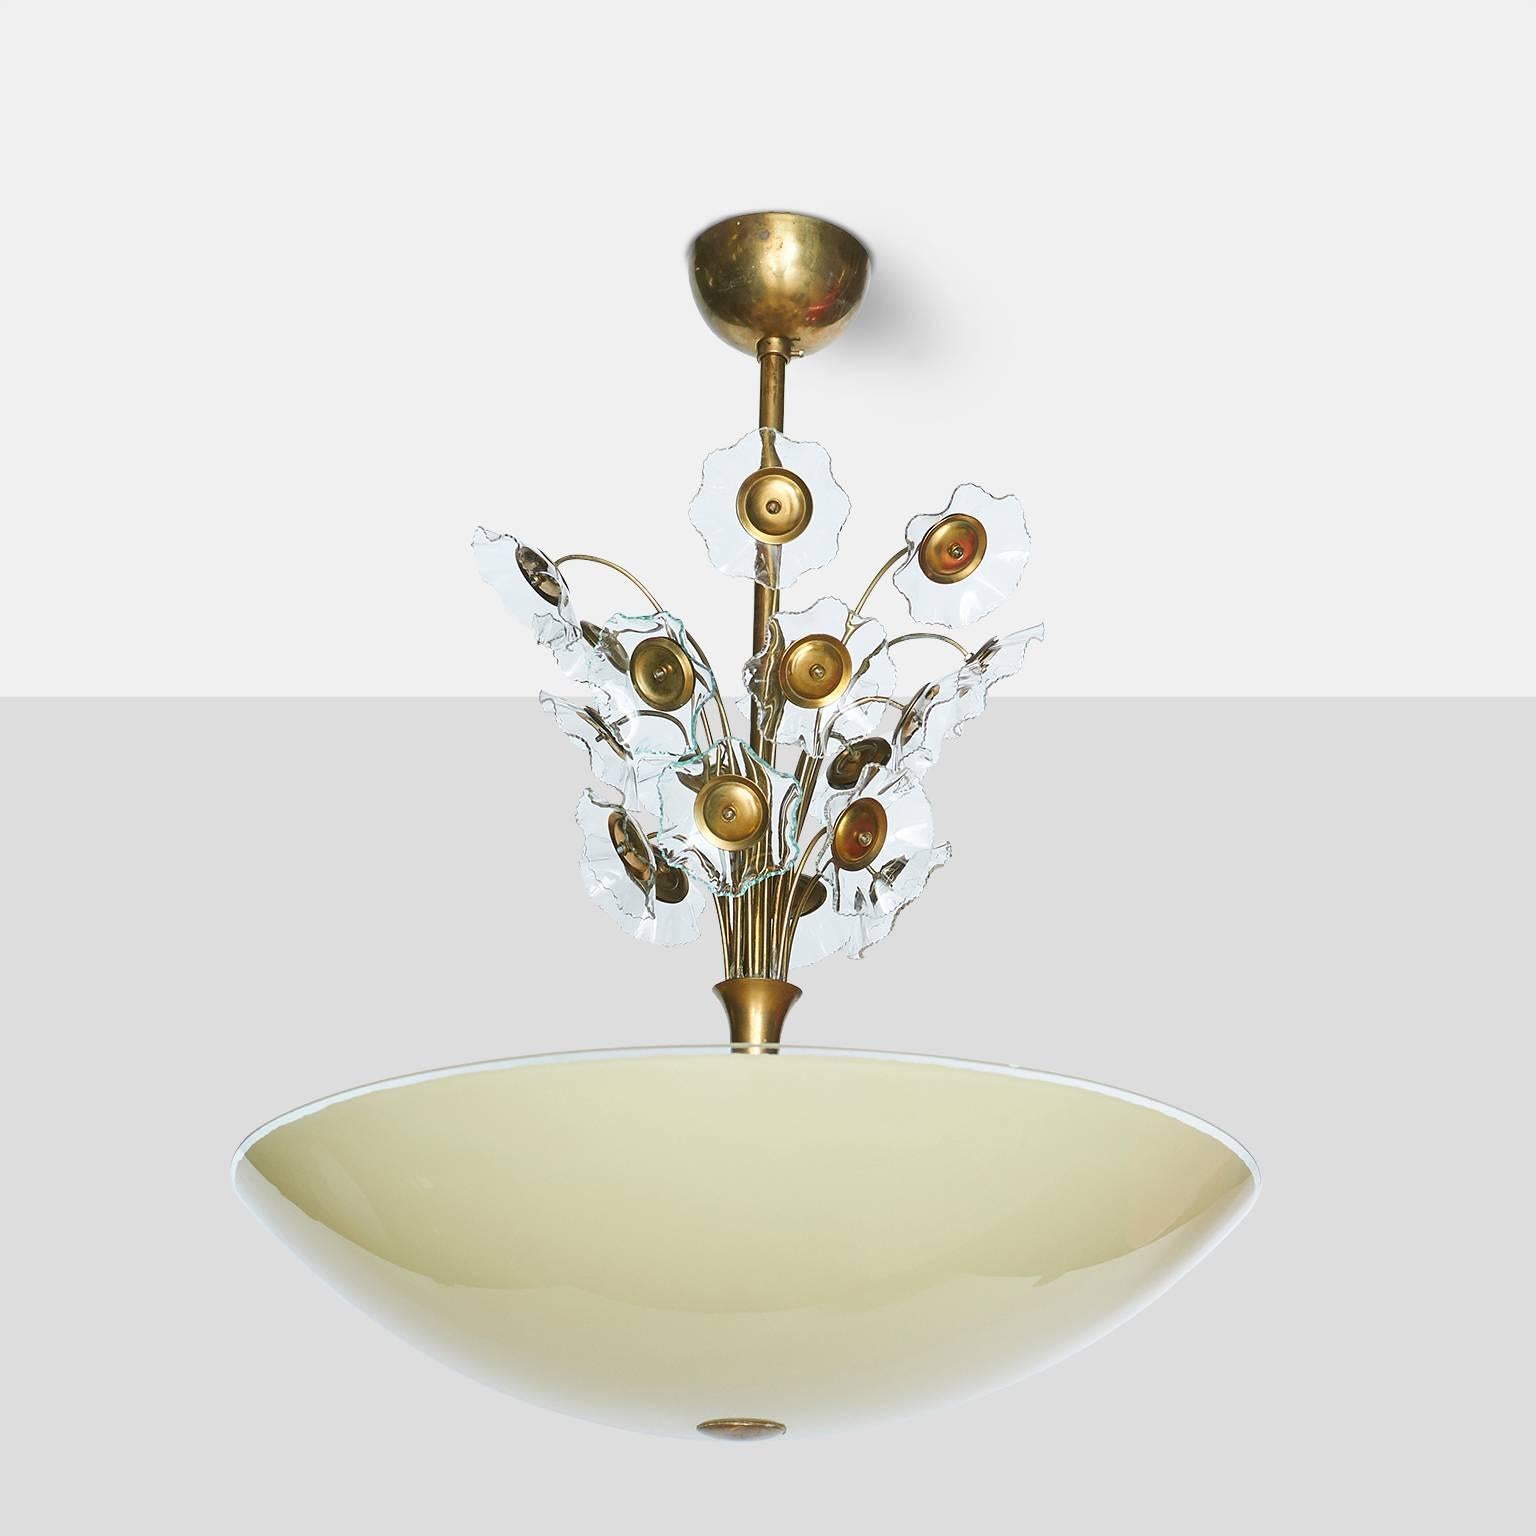 Floral chandelier by Lisa Johansson-Pape
Large chandelier with a yellow glass shade and transparent glass flowers above the stem on an all brass frame,
Finland, circa 1960s.